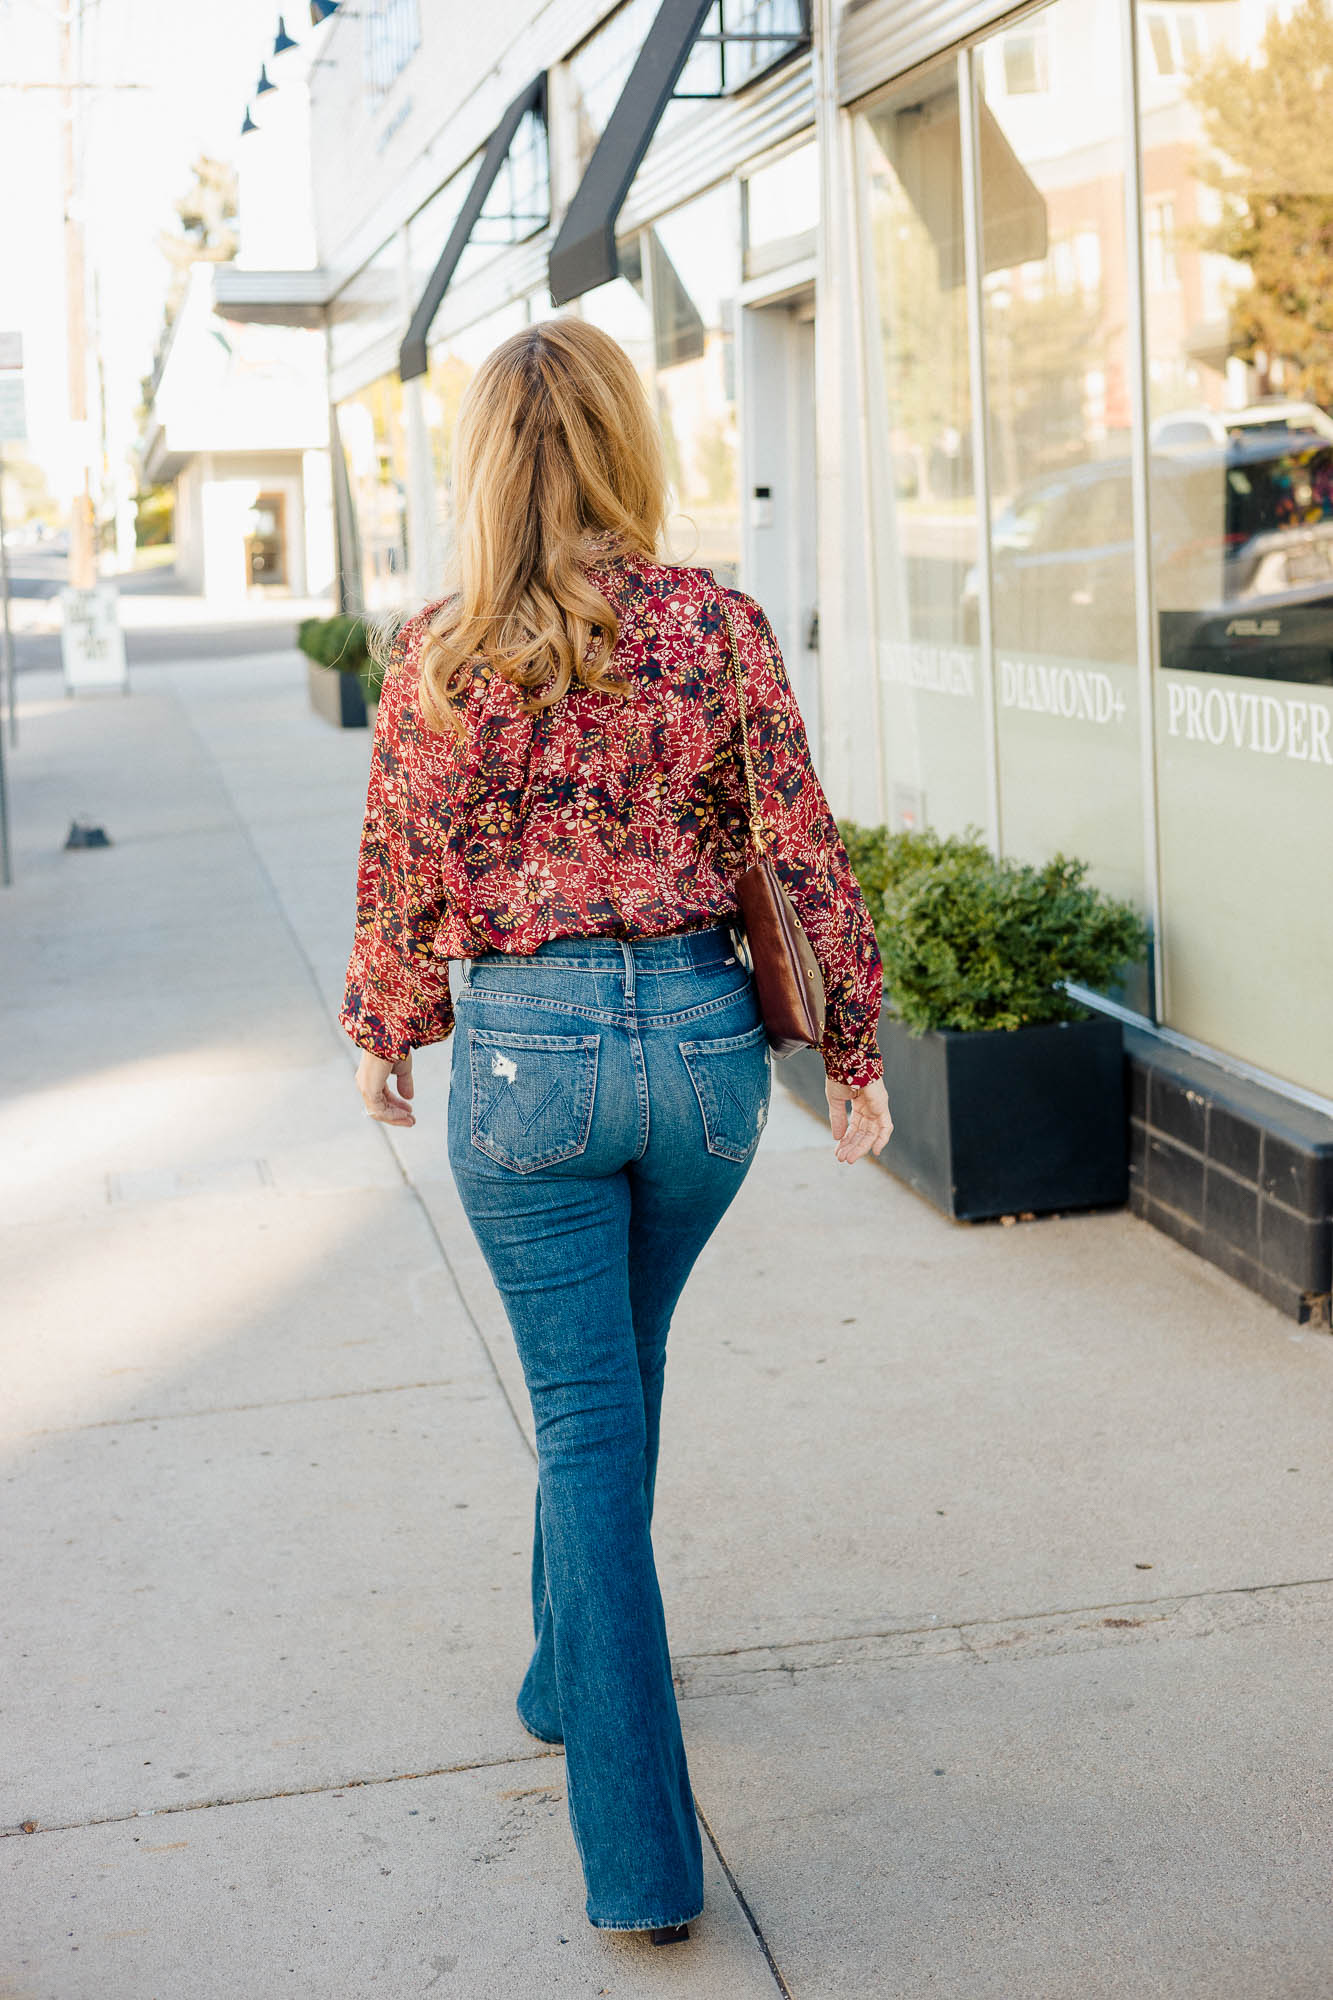 The back view of the Mother Super Cruiser Flare jeans and ba&sh fall blouse.